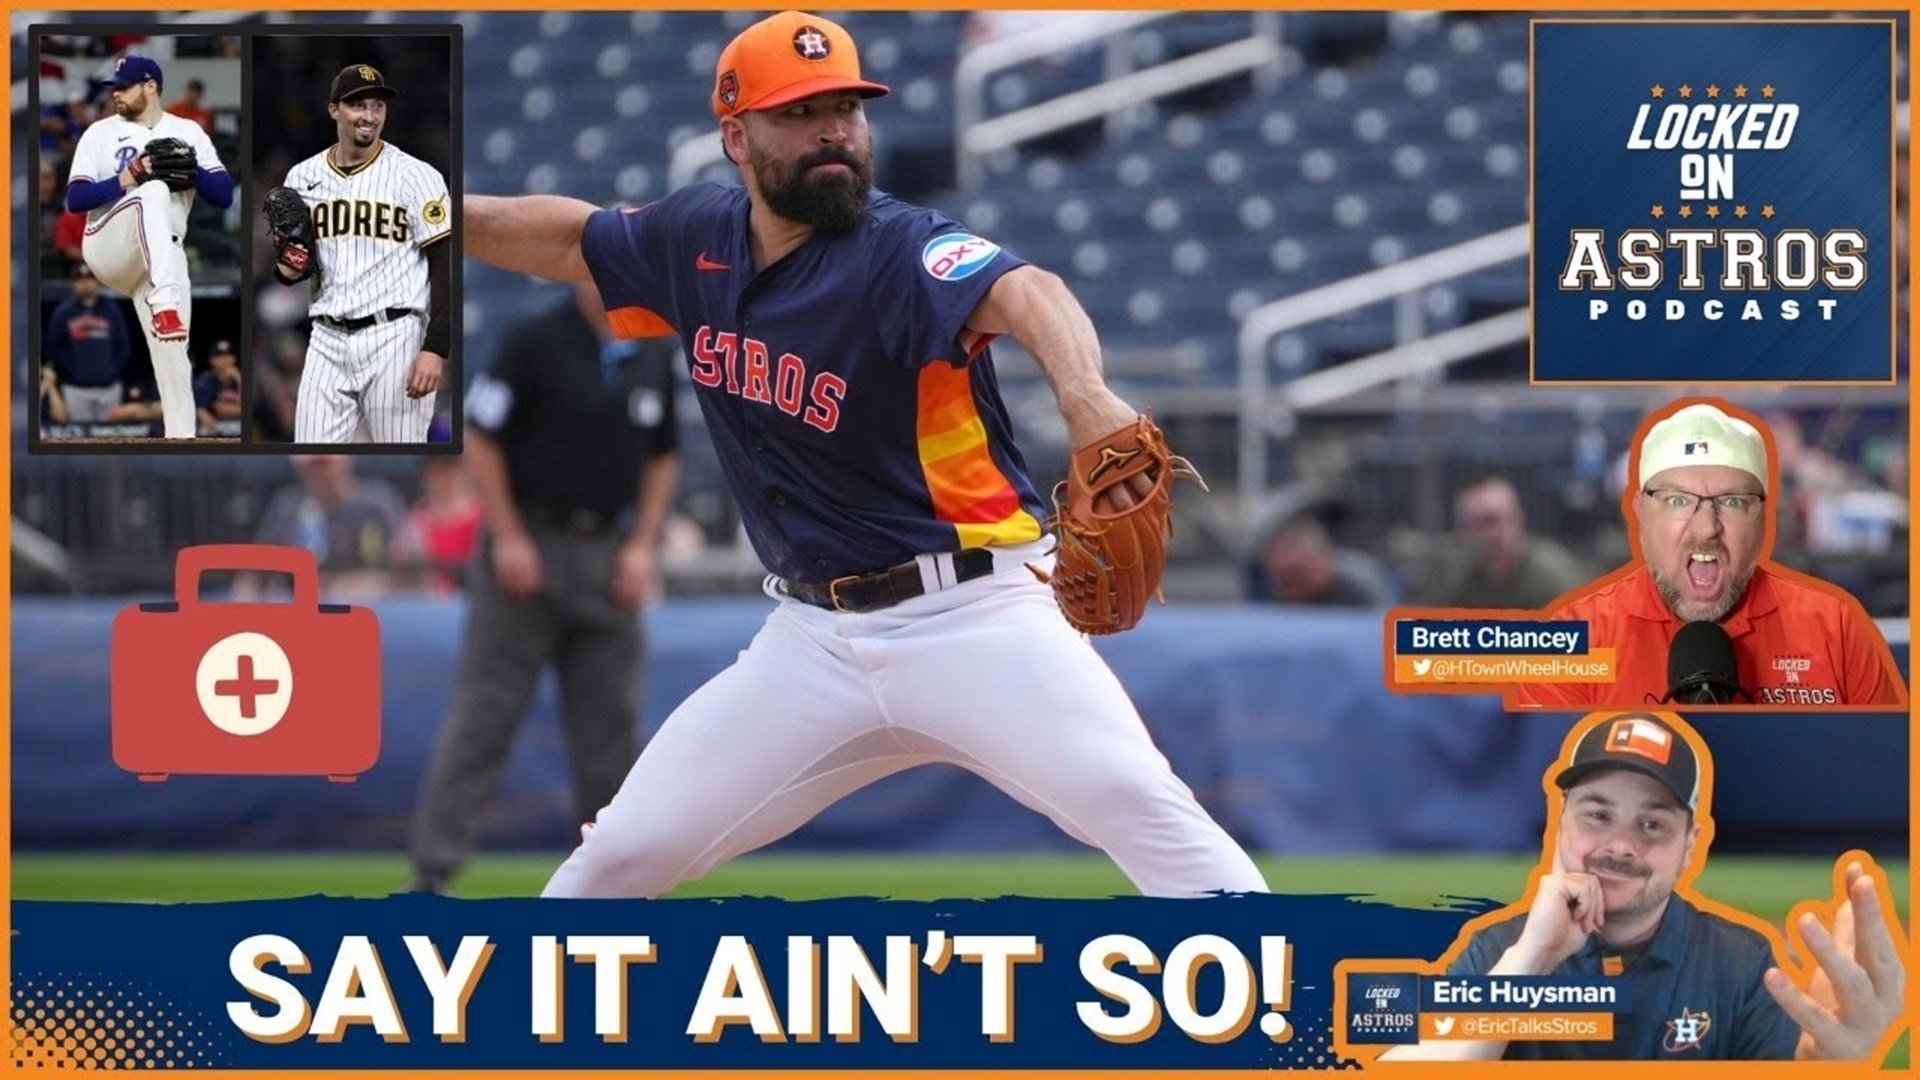 Join Eric Huysman and Brett Chancey for a special Locked On Astros podcast to discuss Jose Urquidy's potential injury.